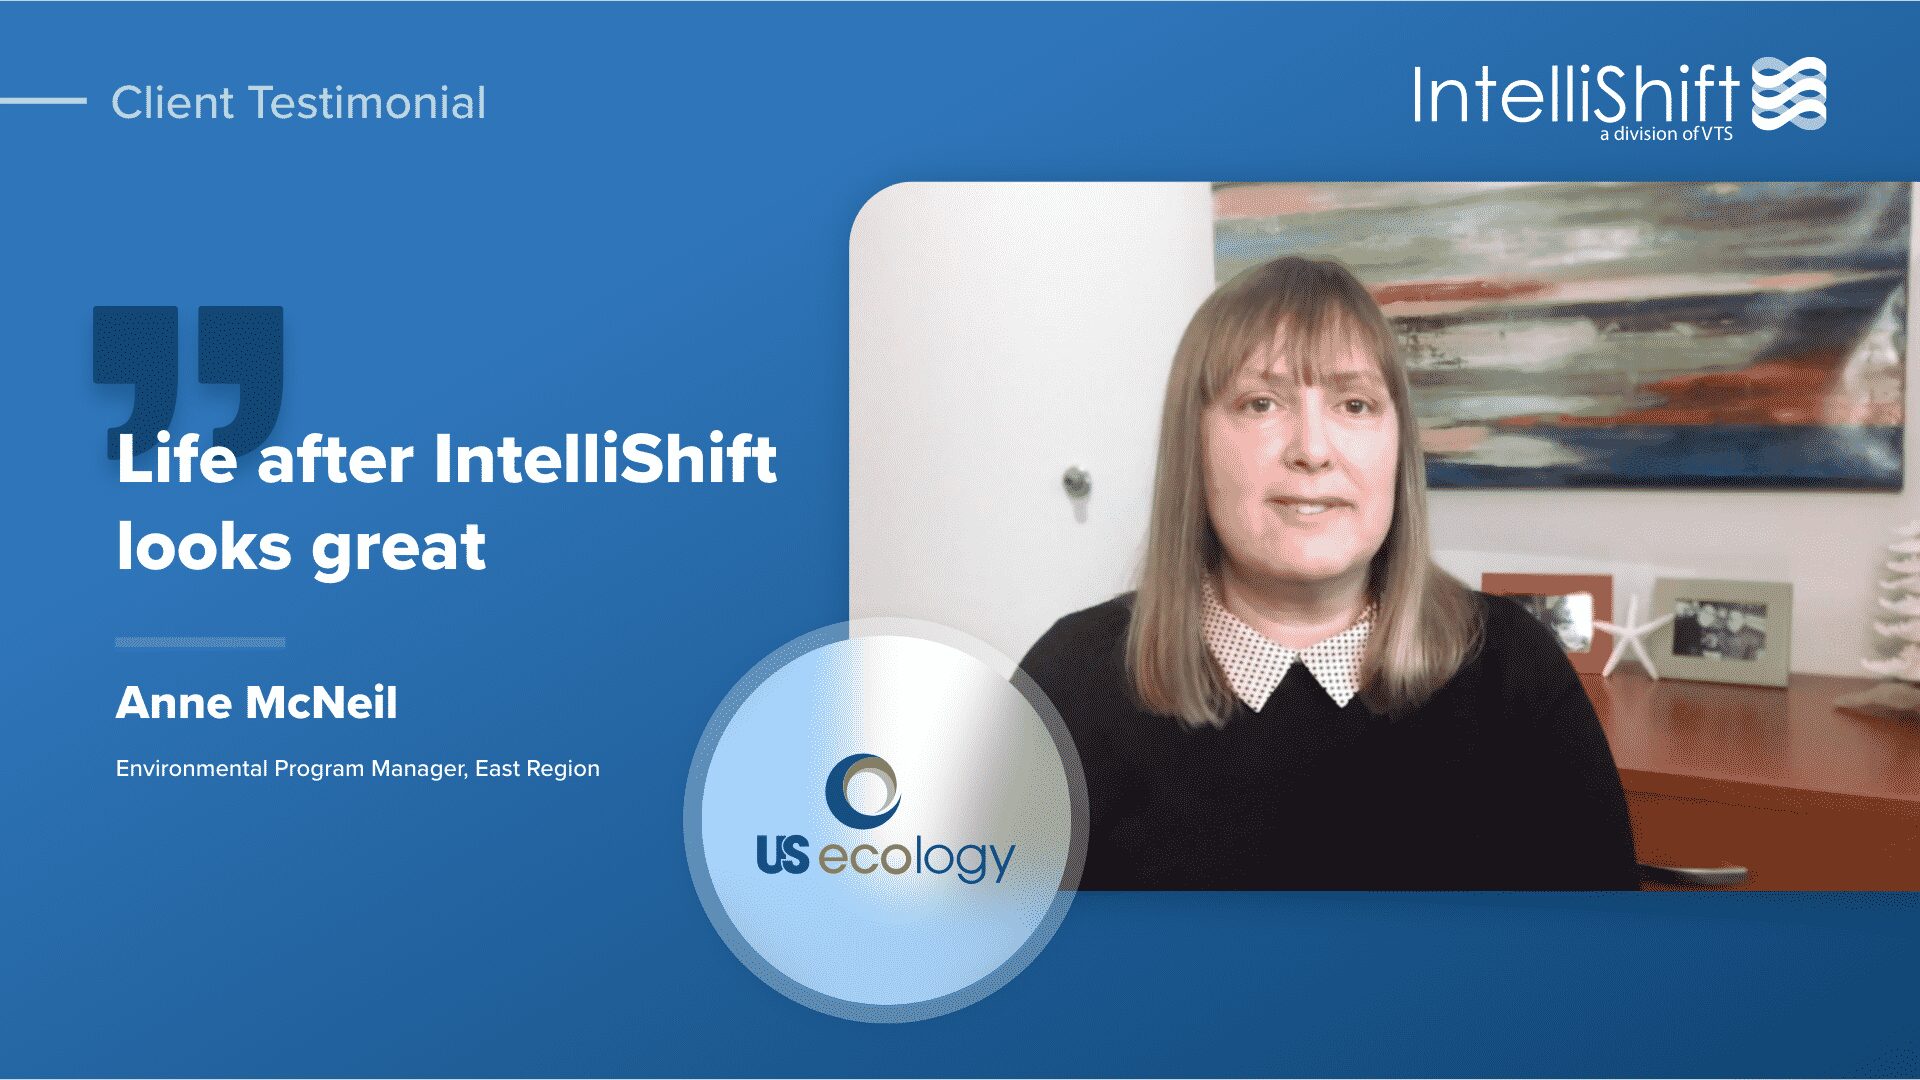 Video: Client Spotlight – US Ecology Shares Why Life with IntelliShift is Great